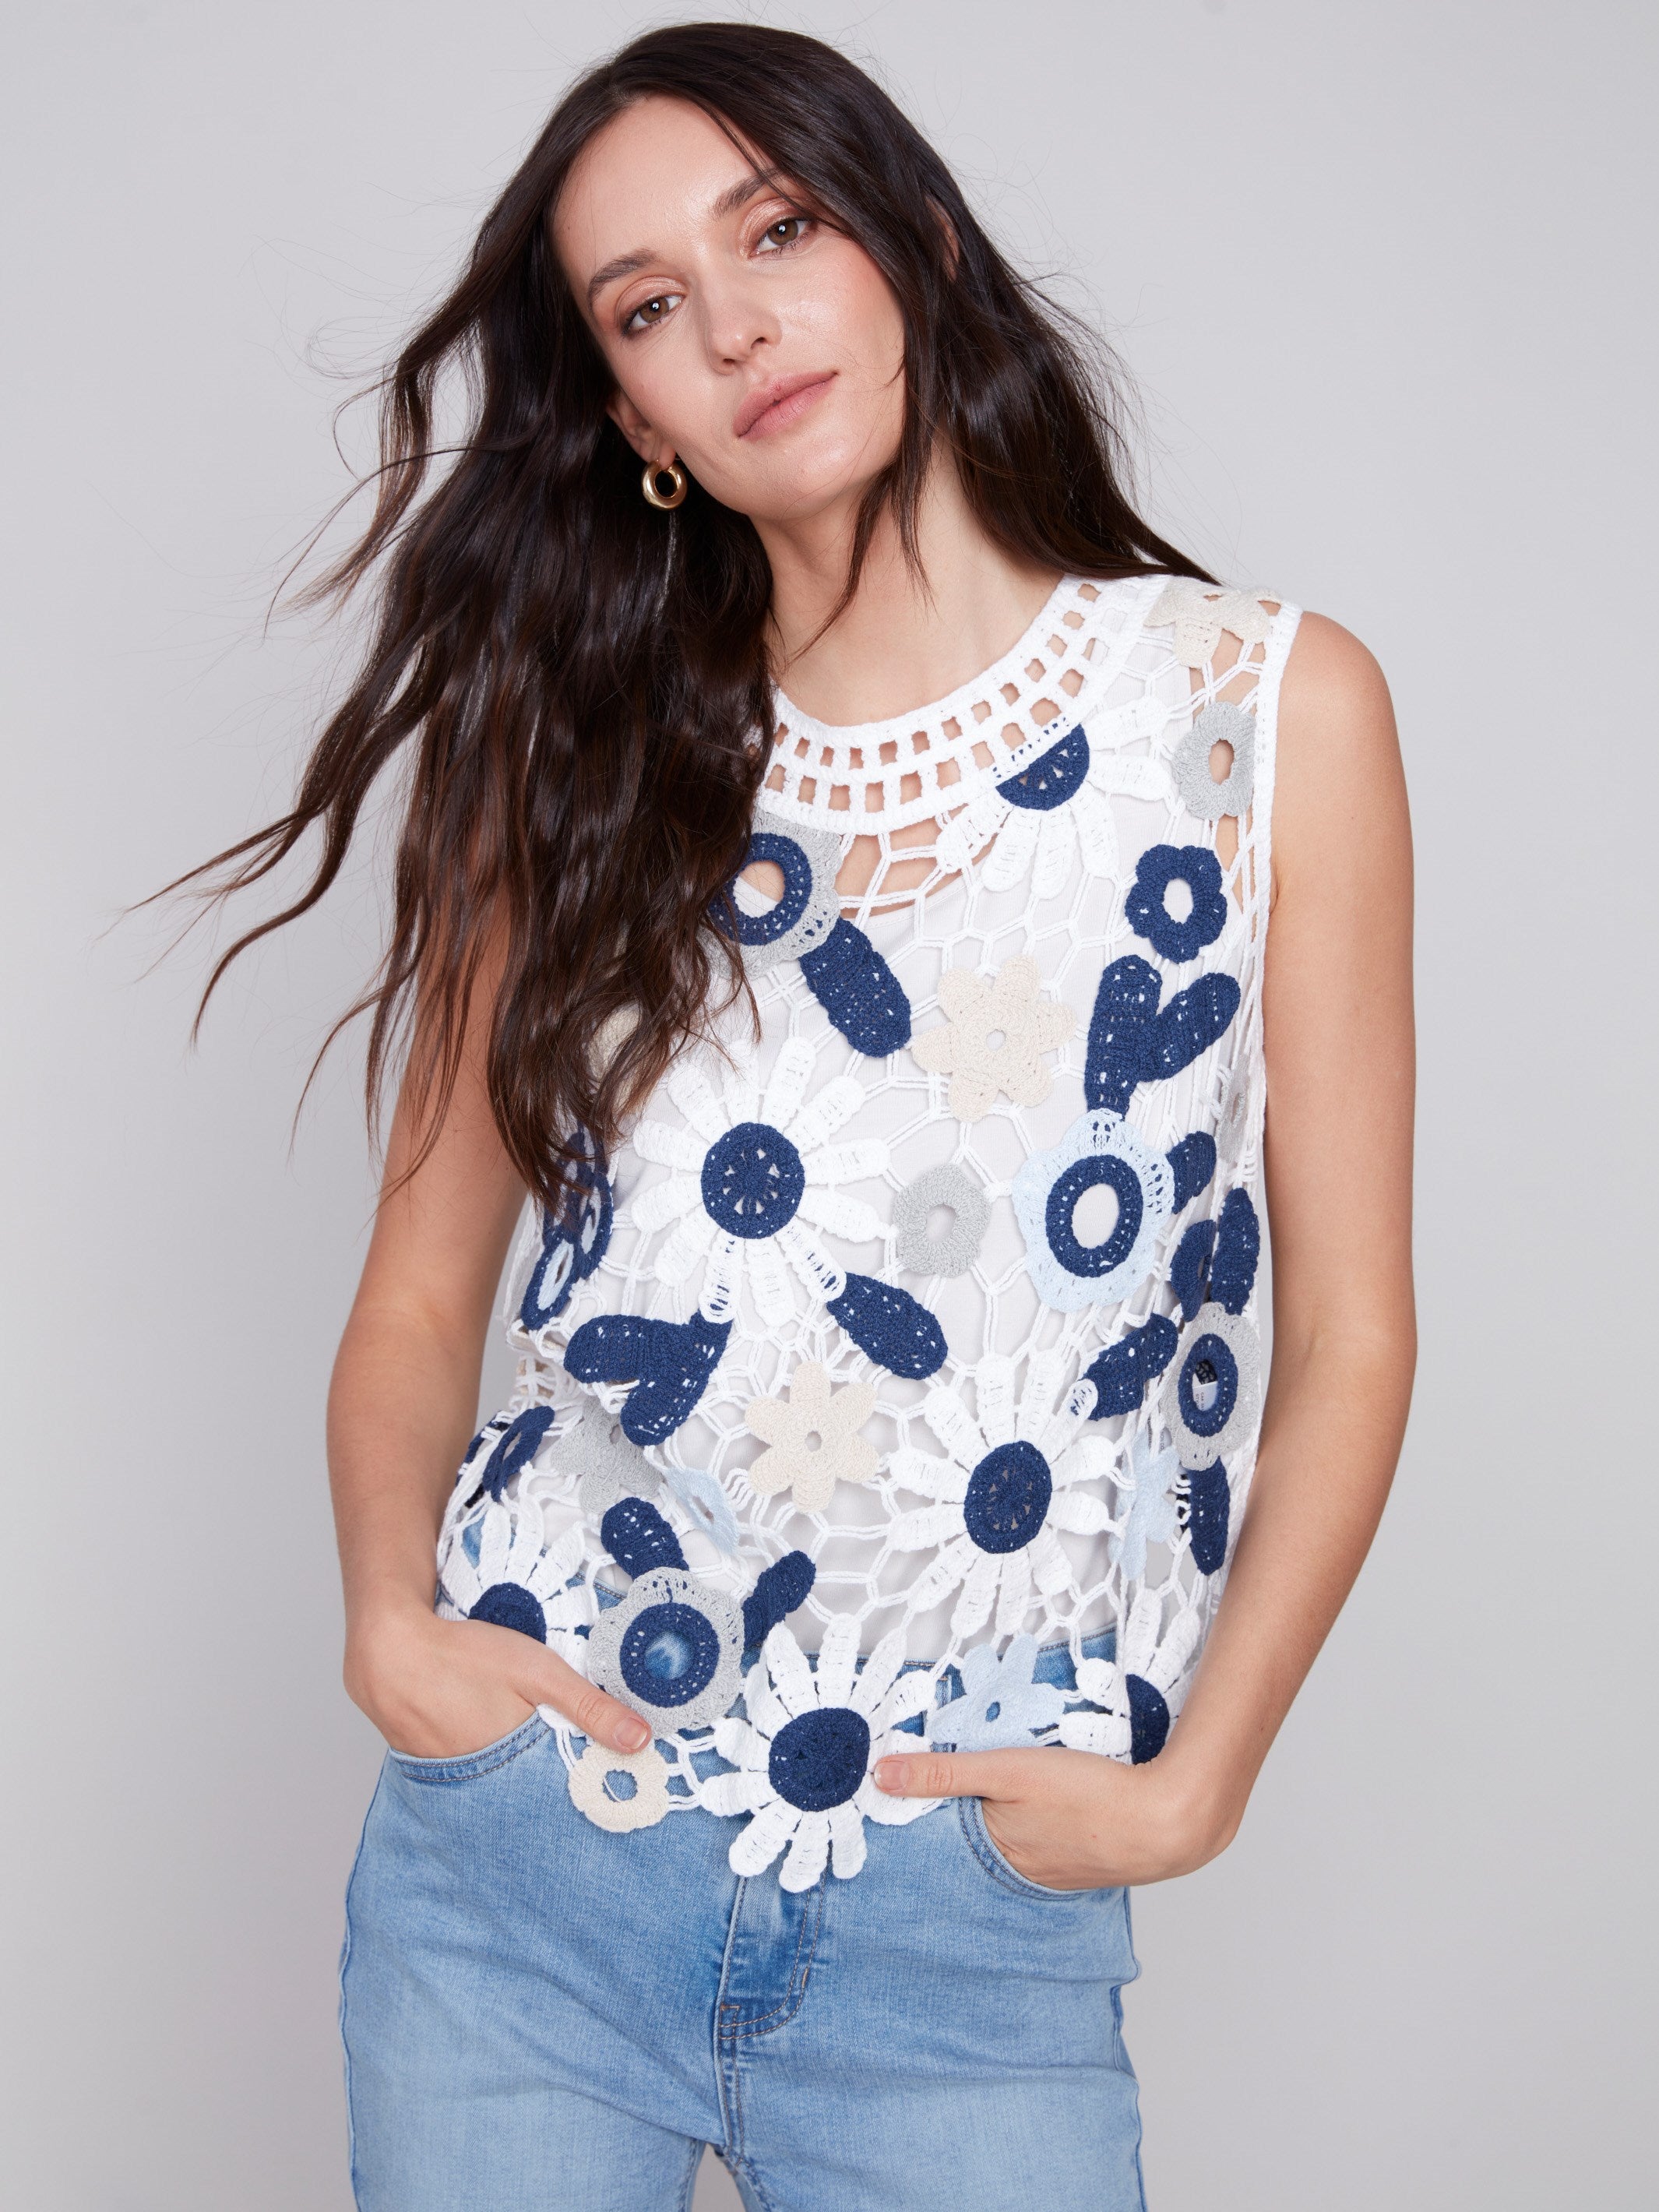 Charlie B Sleeveless Crochet Top With Floral Pattern - Celadon - Image 5